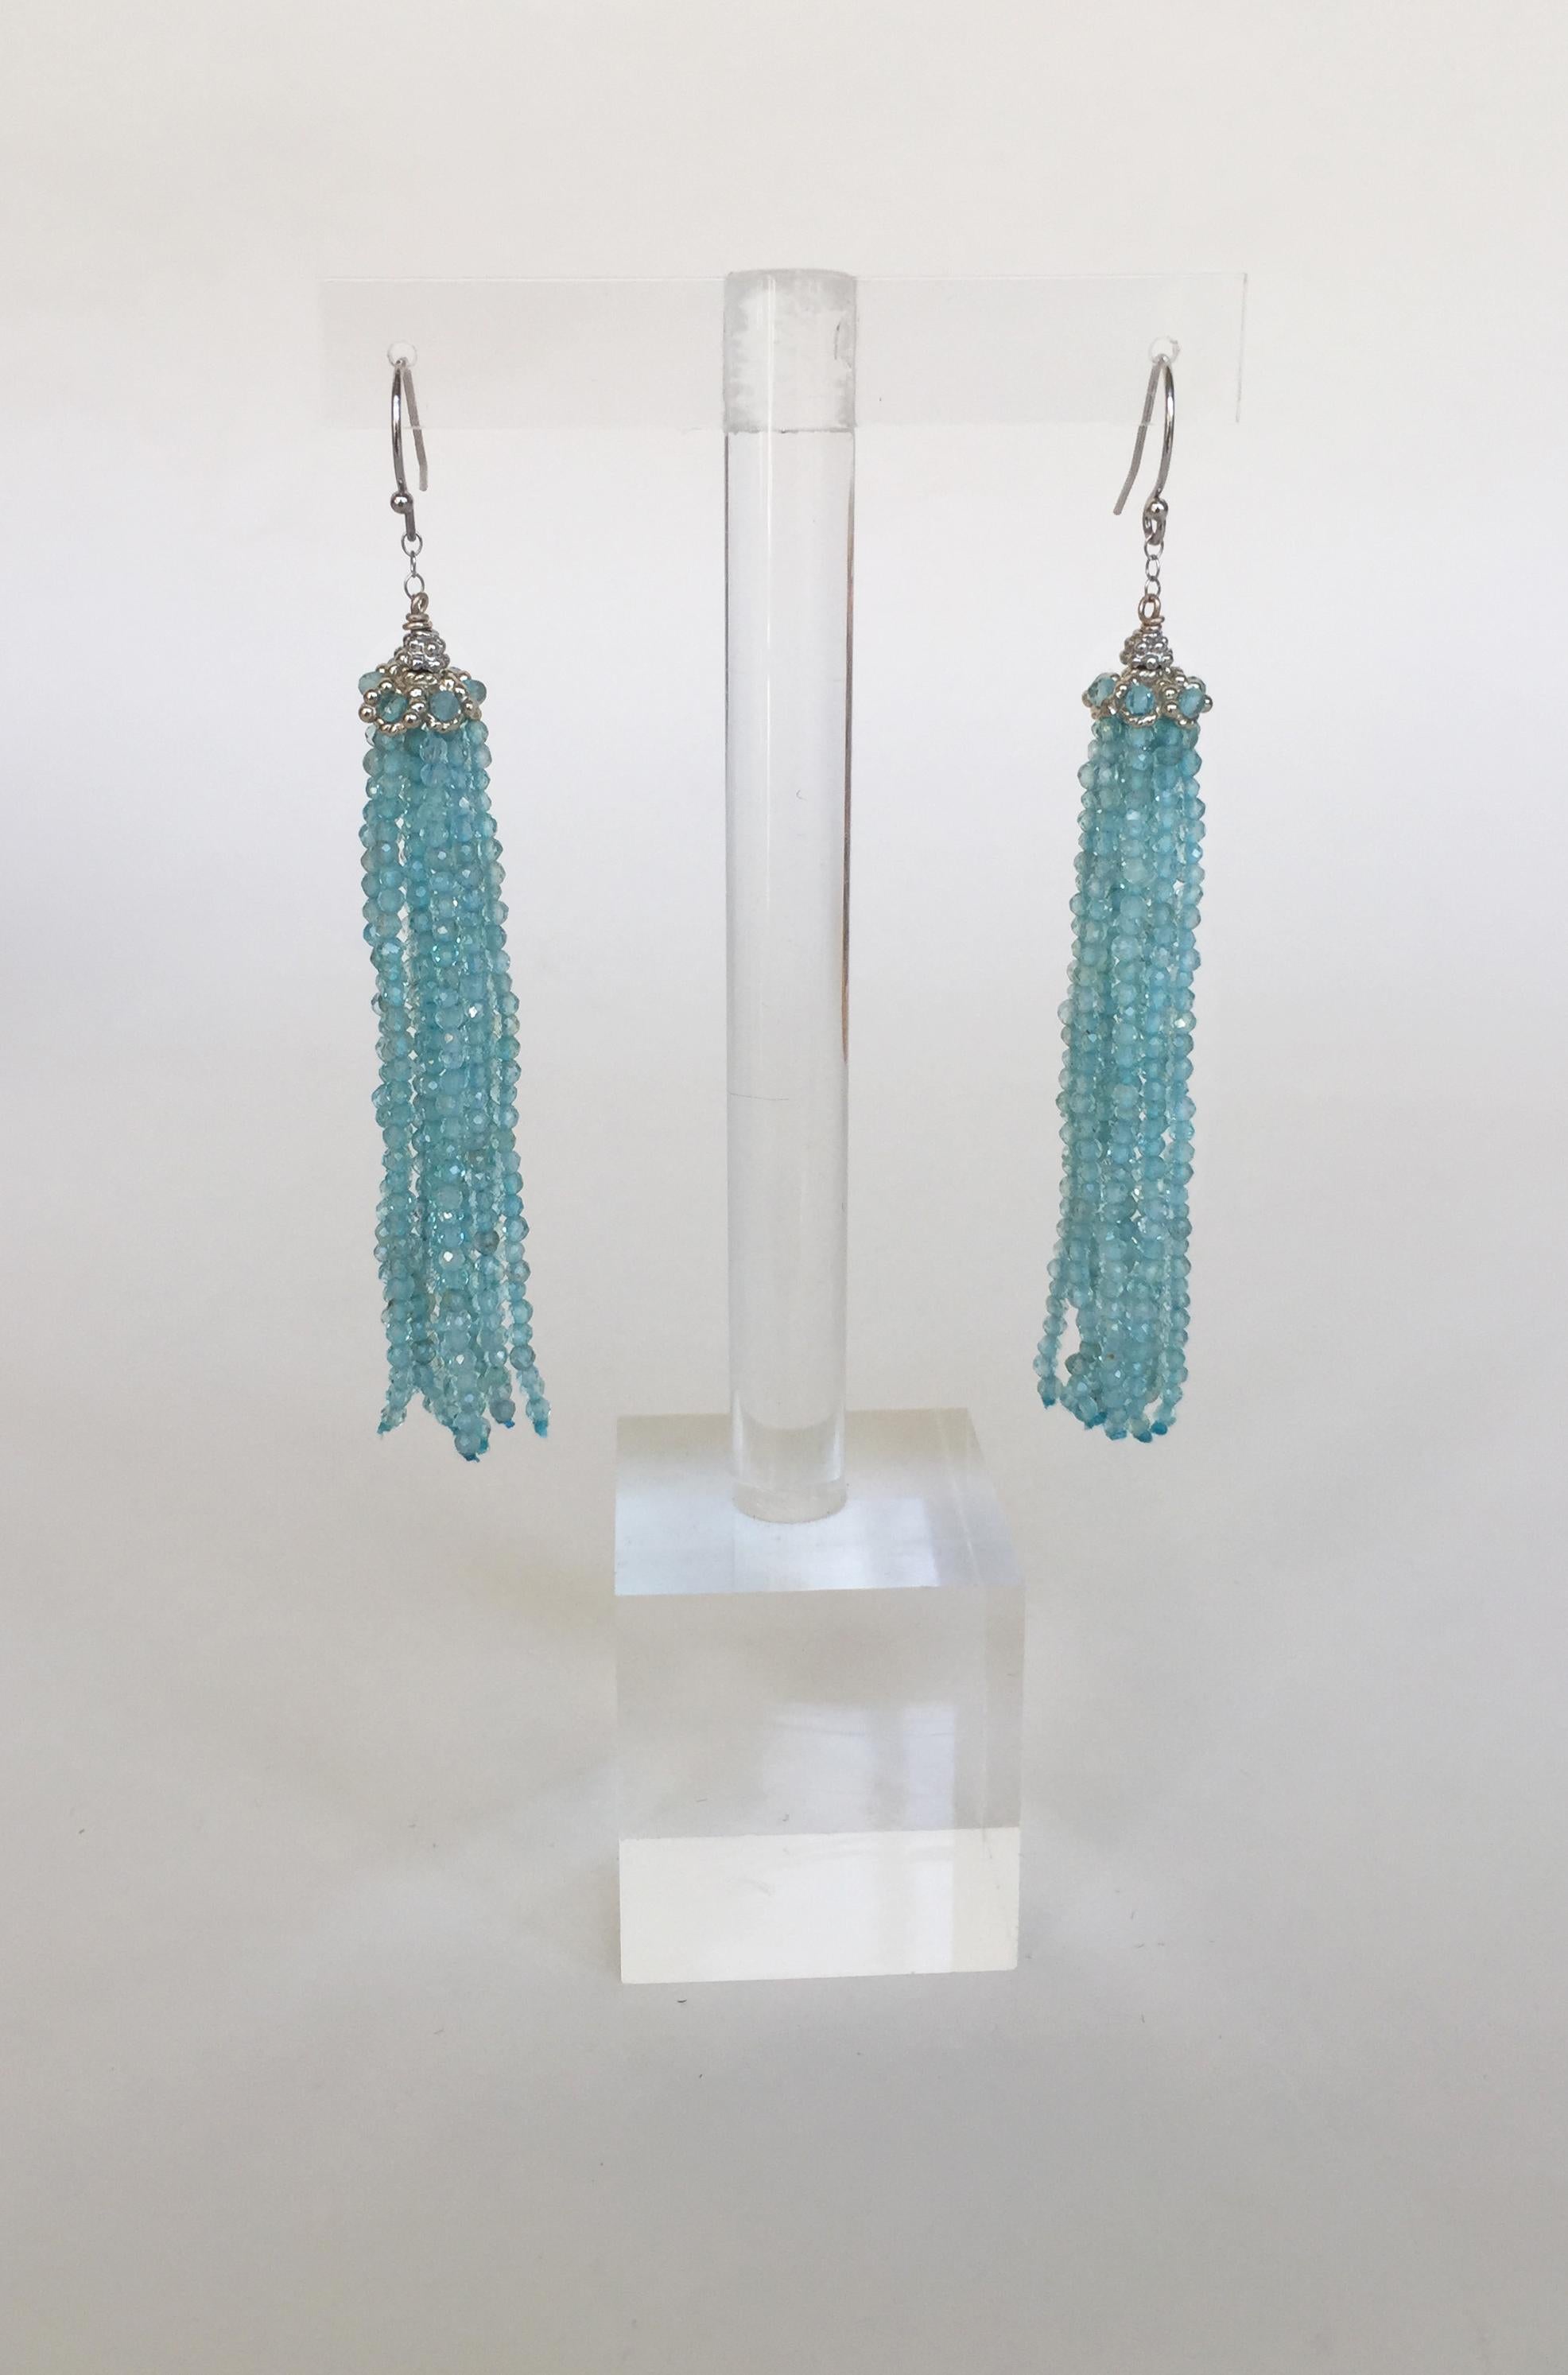 These faceted aquamarine tassel earrings with 14k white gold roundel, chian, and hook are iridescent with shimmering strands of aquamarine beads. At 3.1 inches these beautiful earrings accent the face well. The icey blue of the aquamarine is